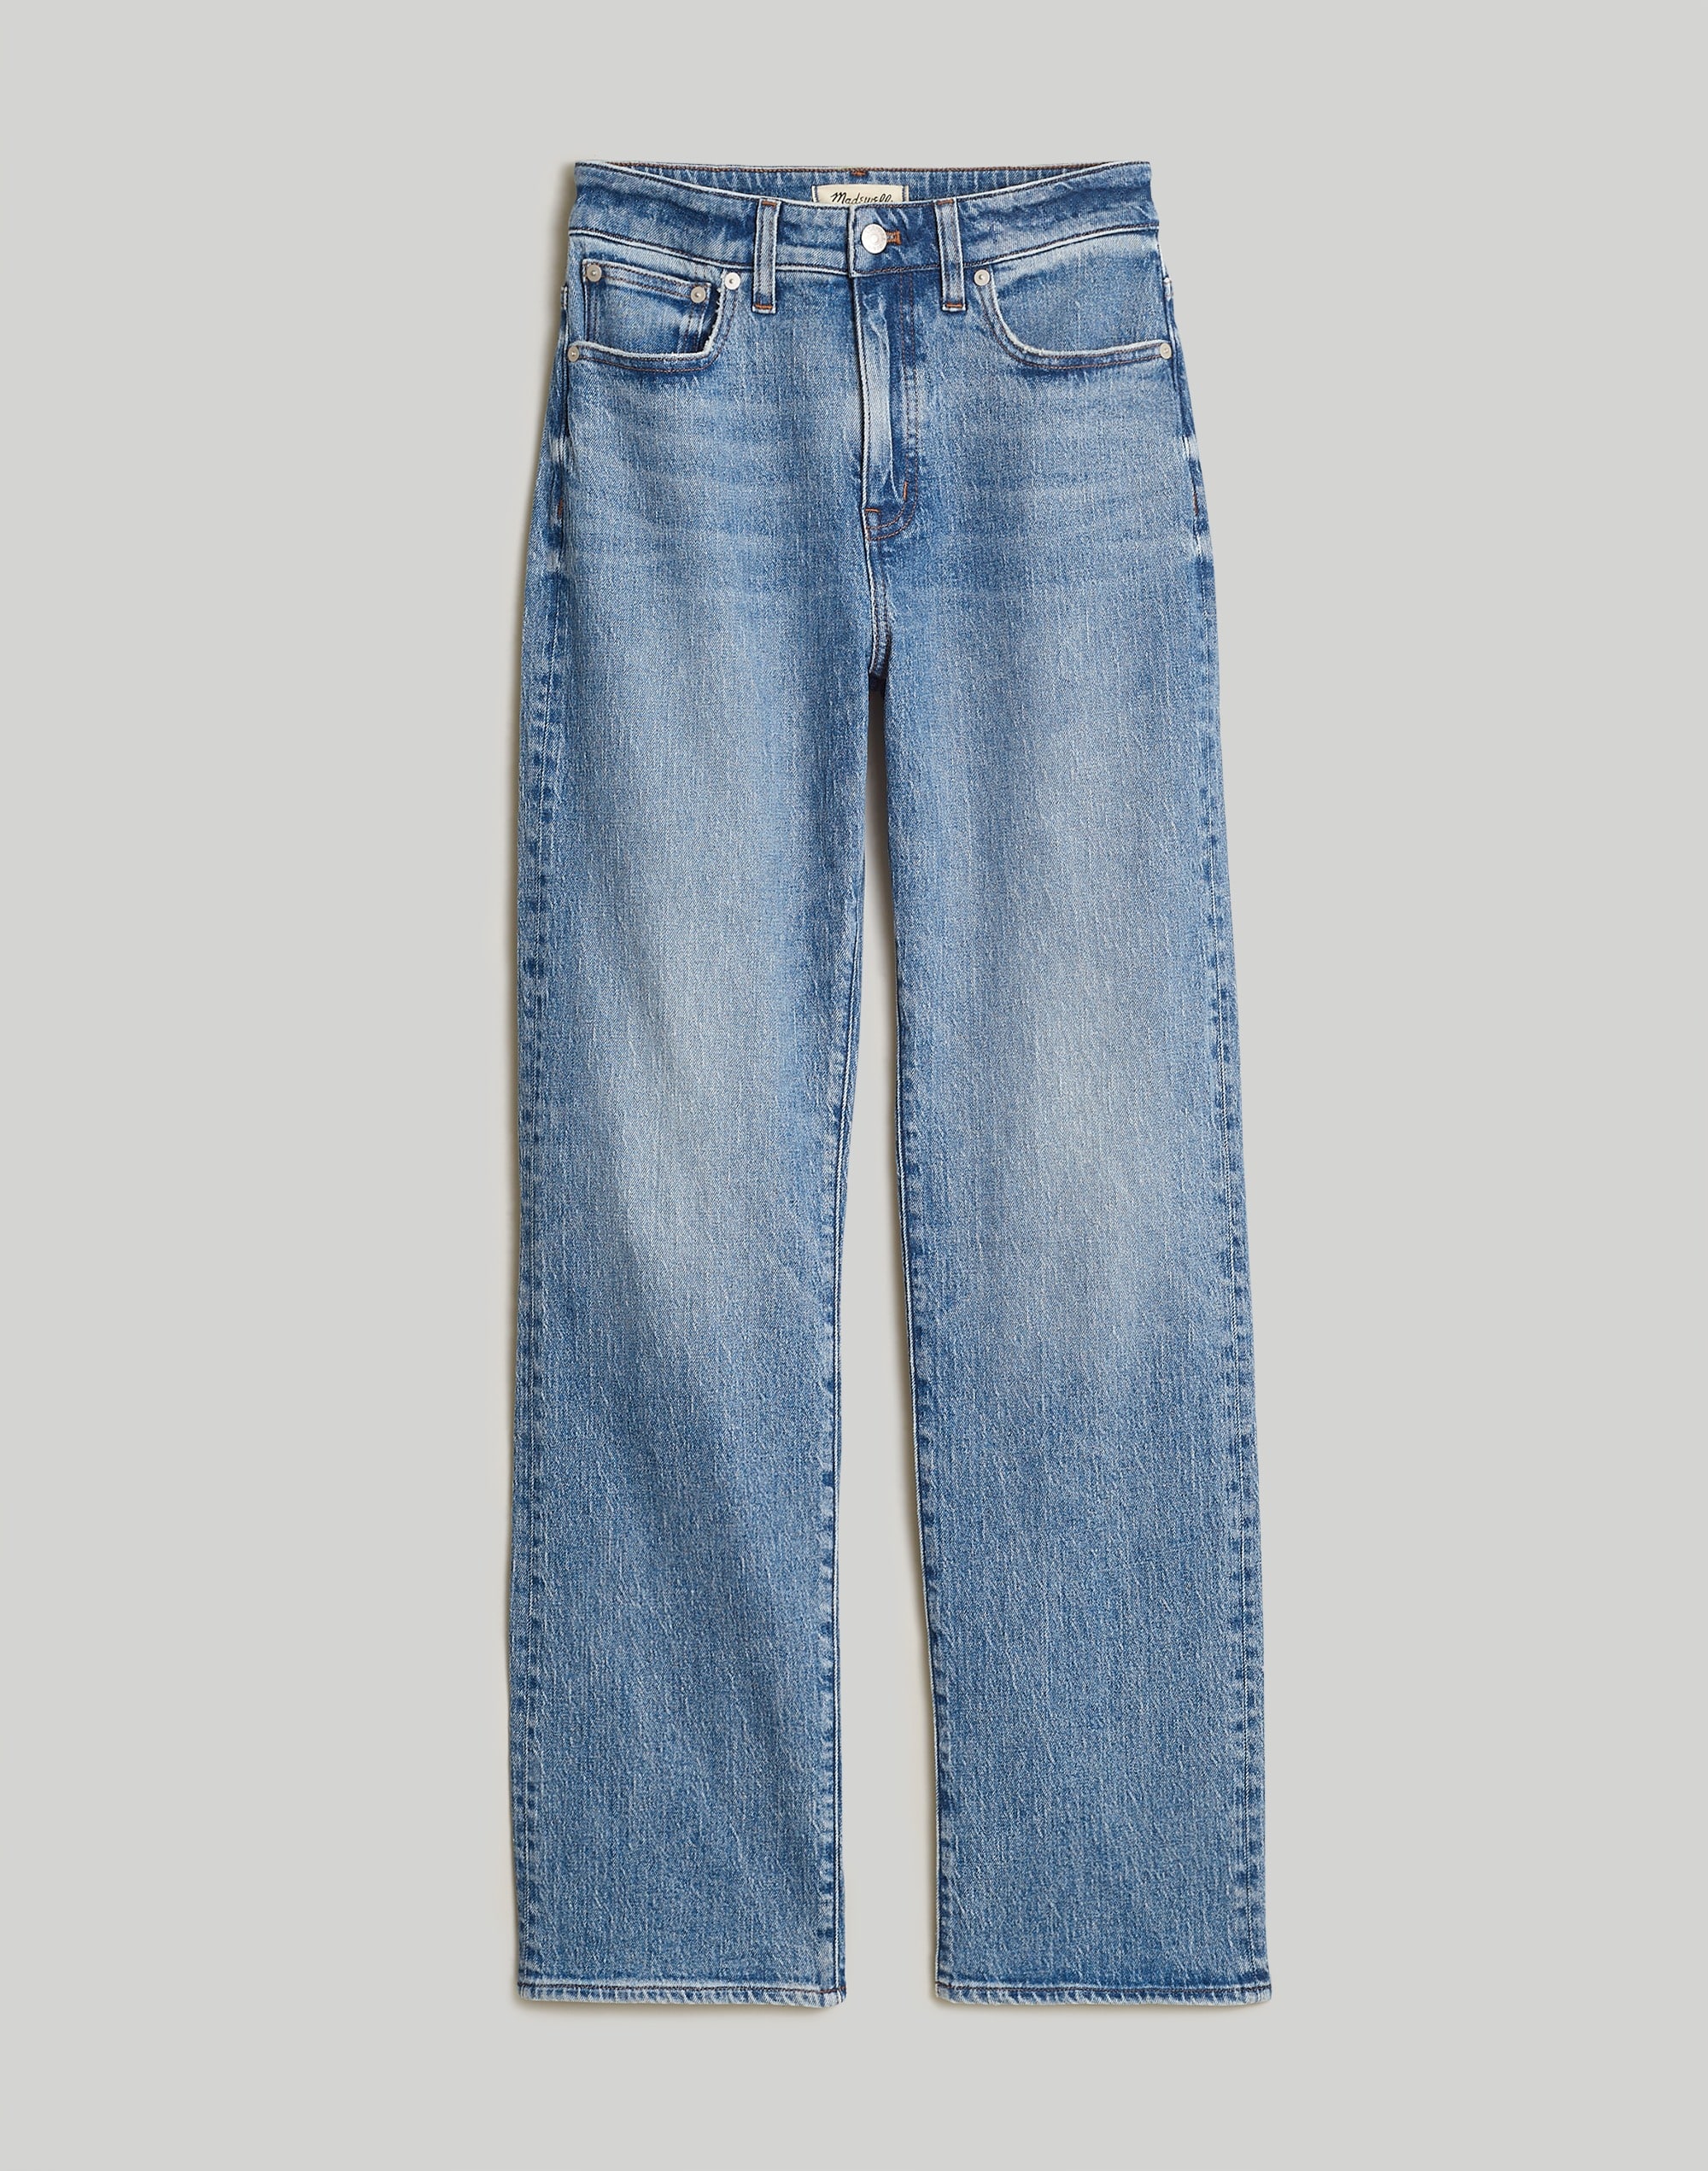 The Plus '90s Straight Jean Enmore Wash